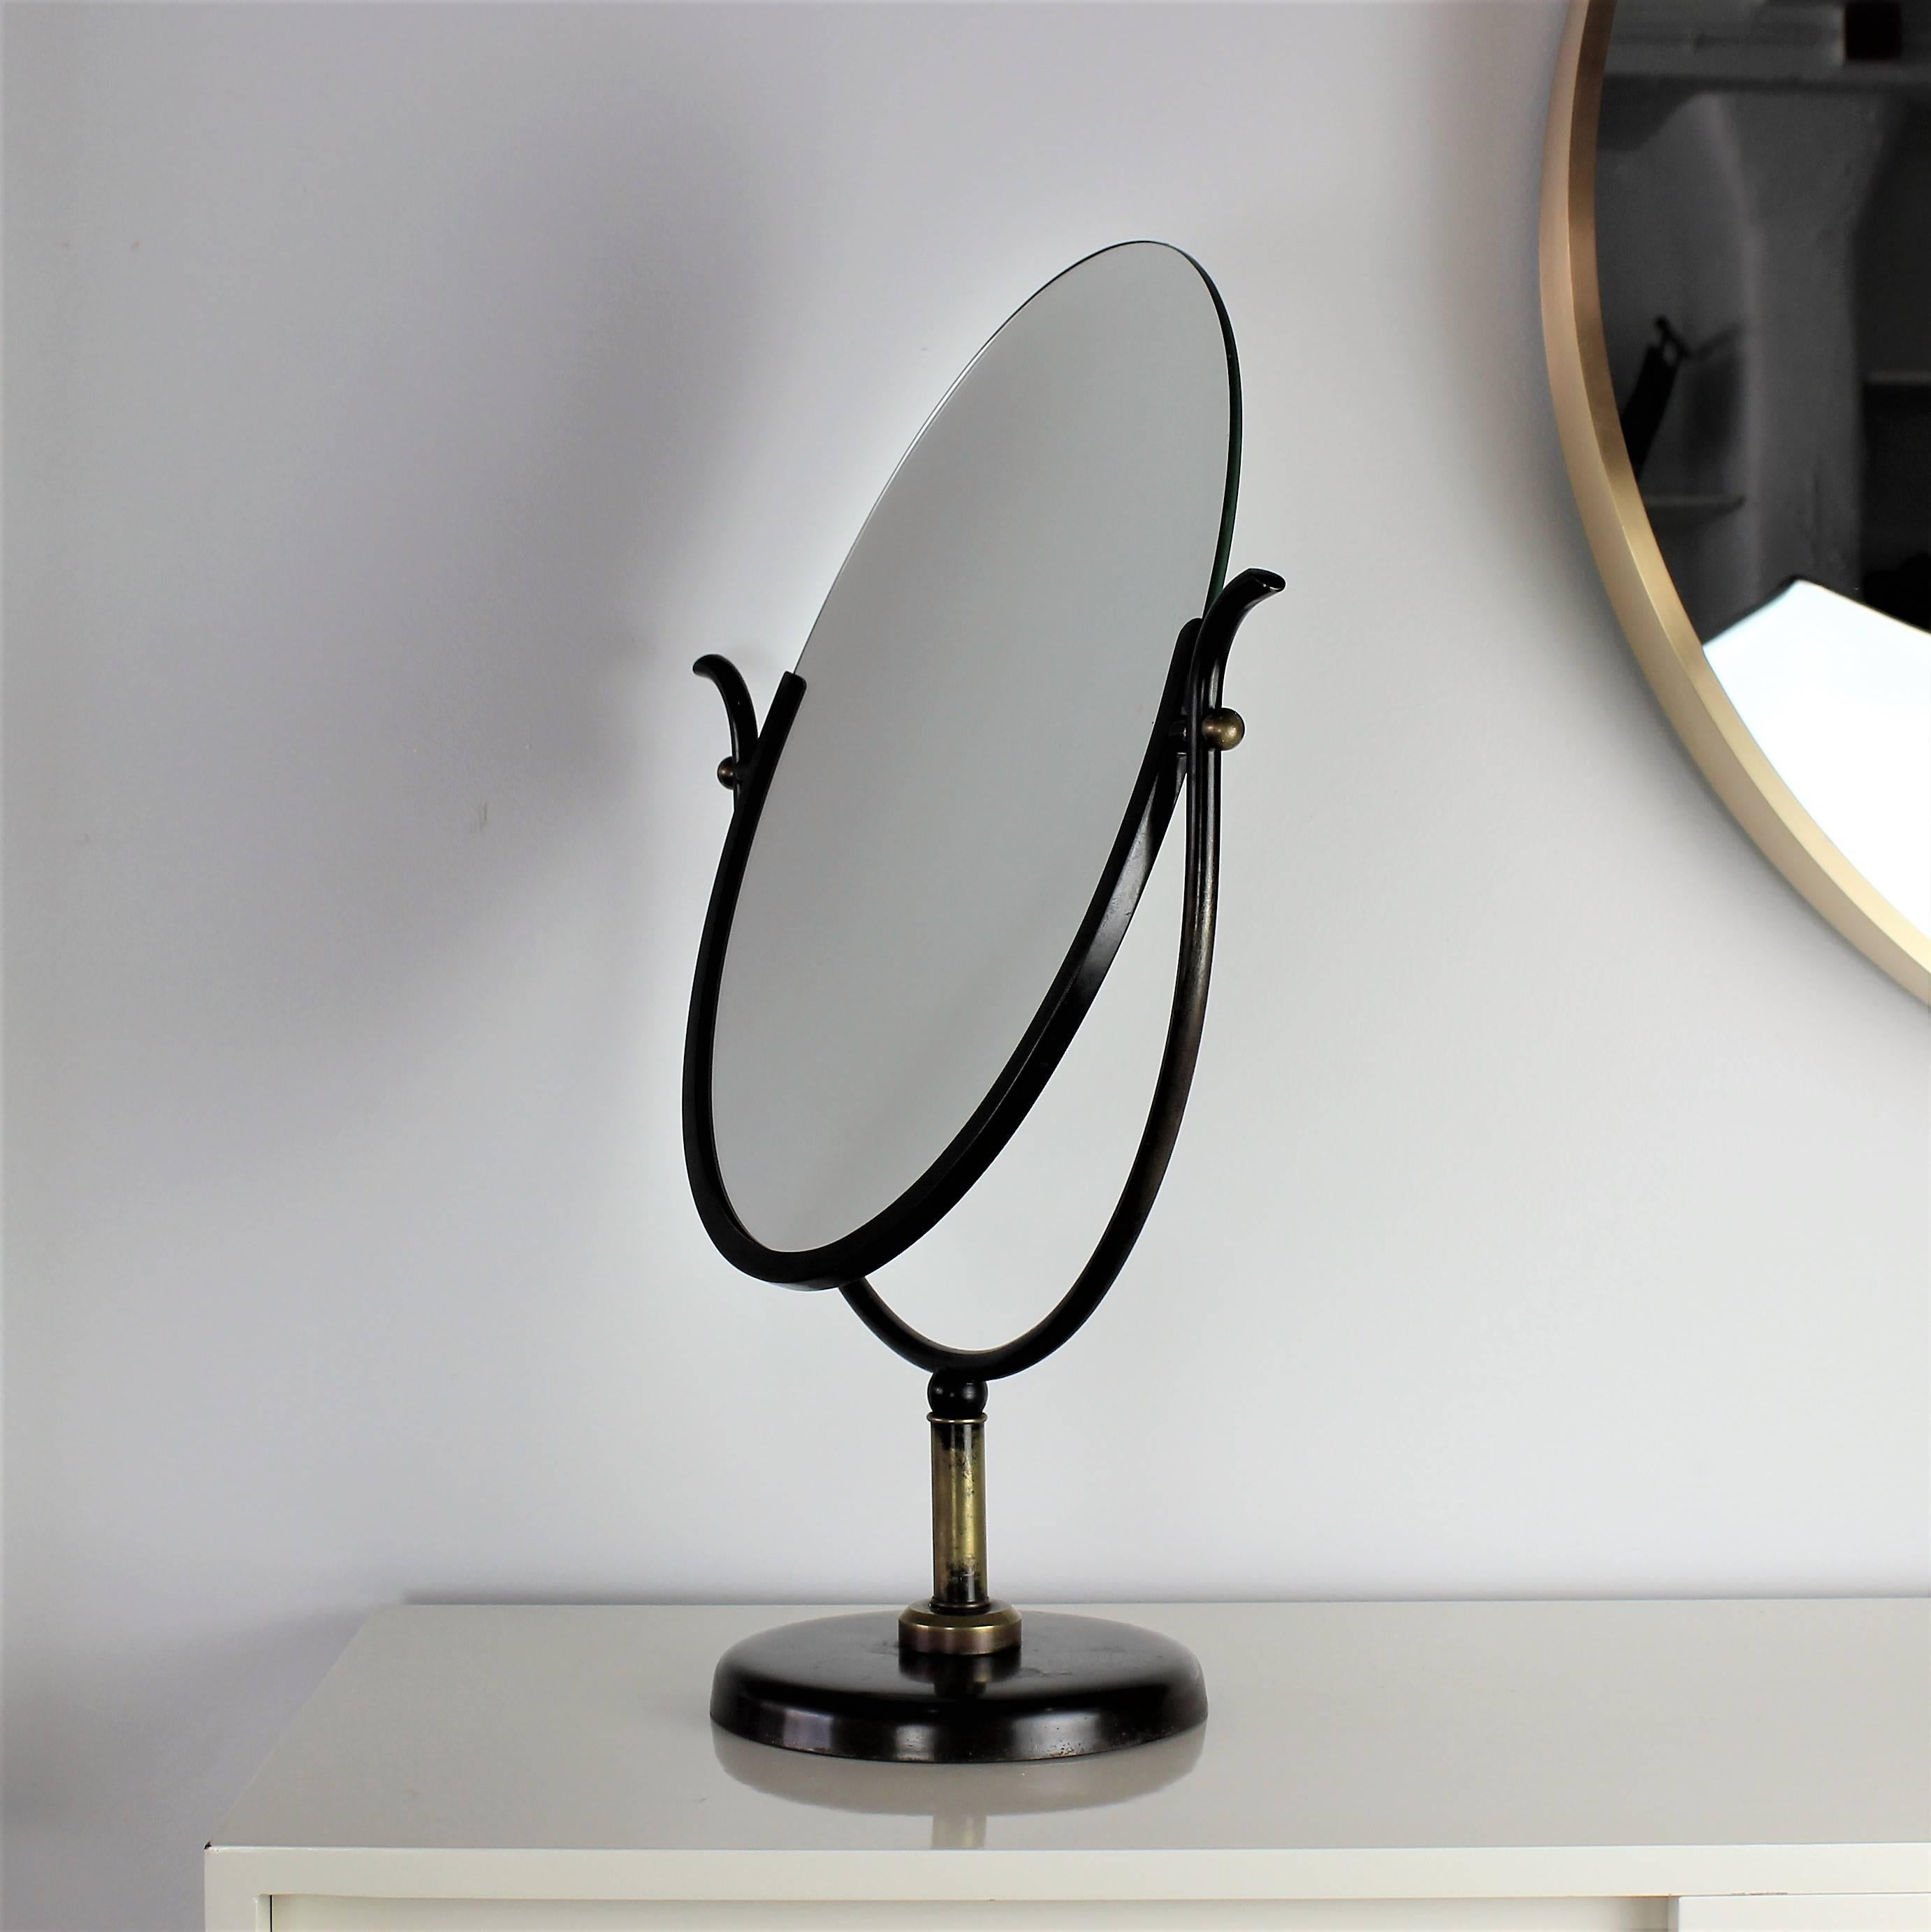 Large sculptural Charles Hollis Jones vanity mirror in bronze and brass, 1970s. Mirrored on both sides. Great vintage condition with minor wear shown in final image. The mirror itself has a light fog on some areas from age, but could be easily